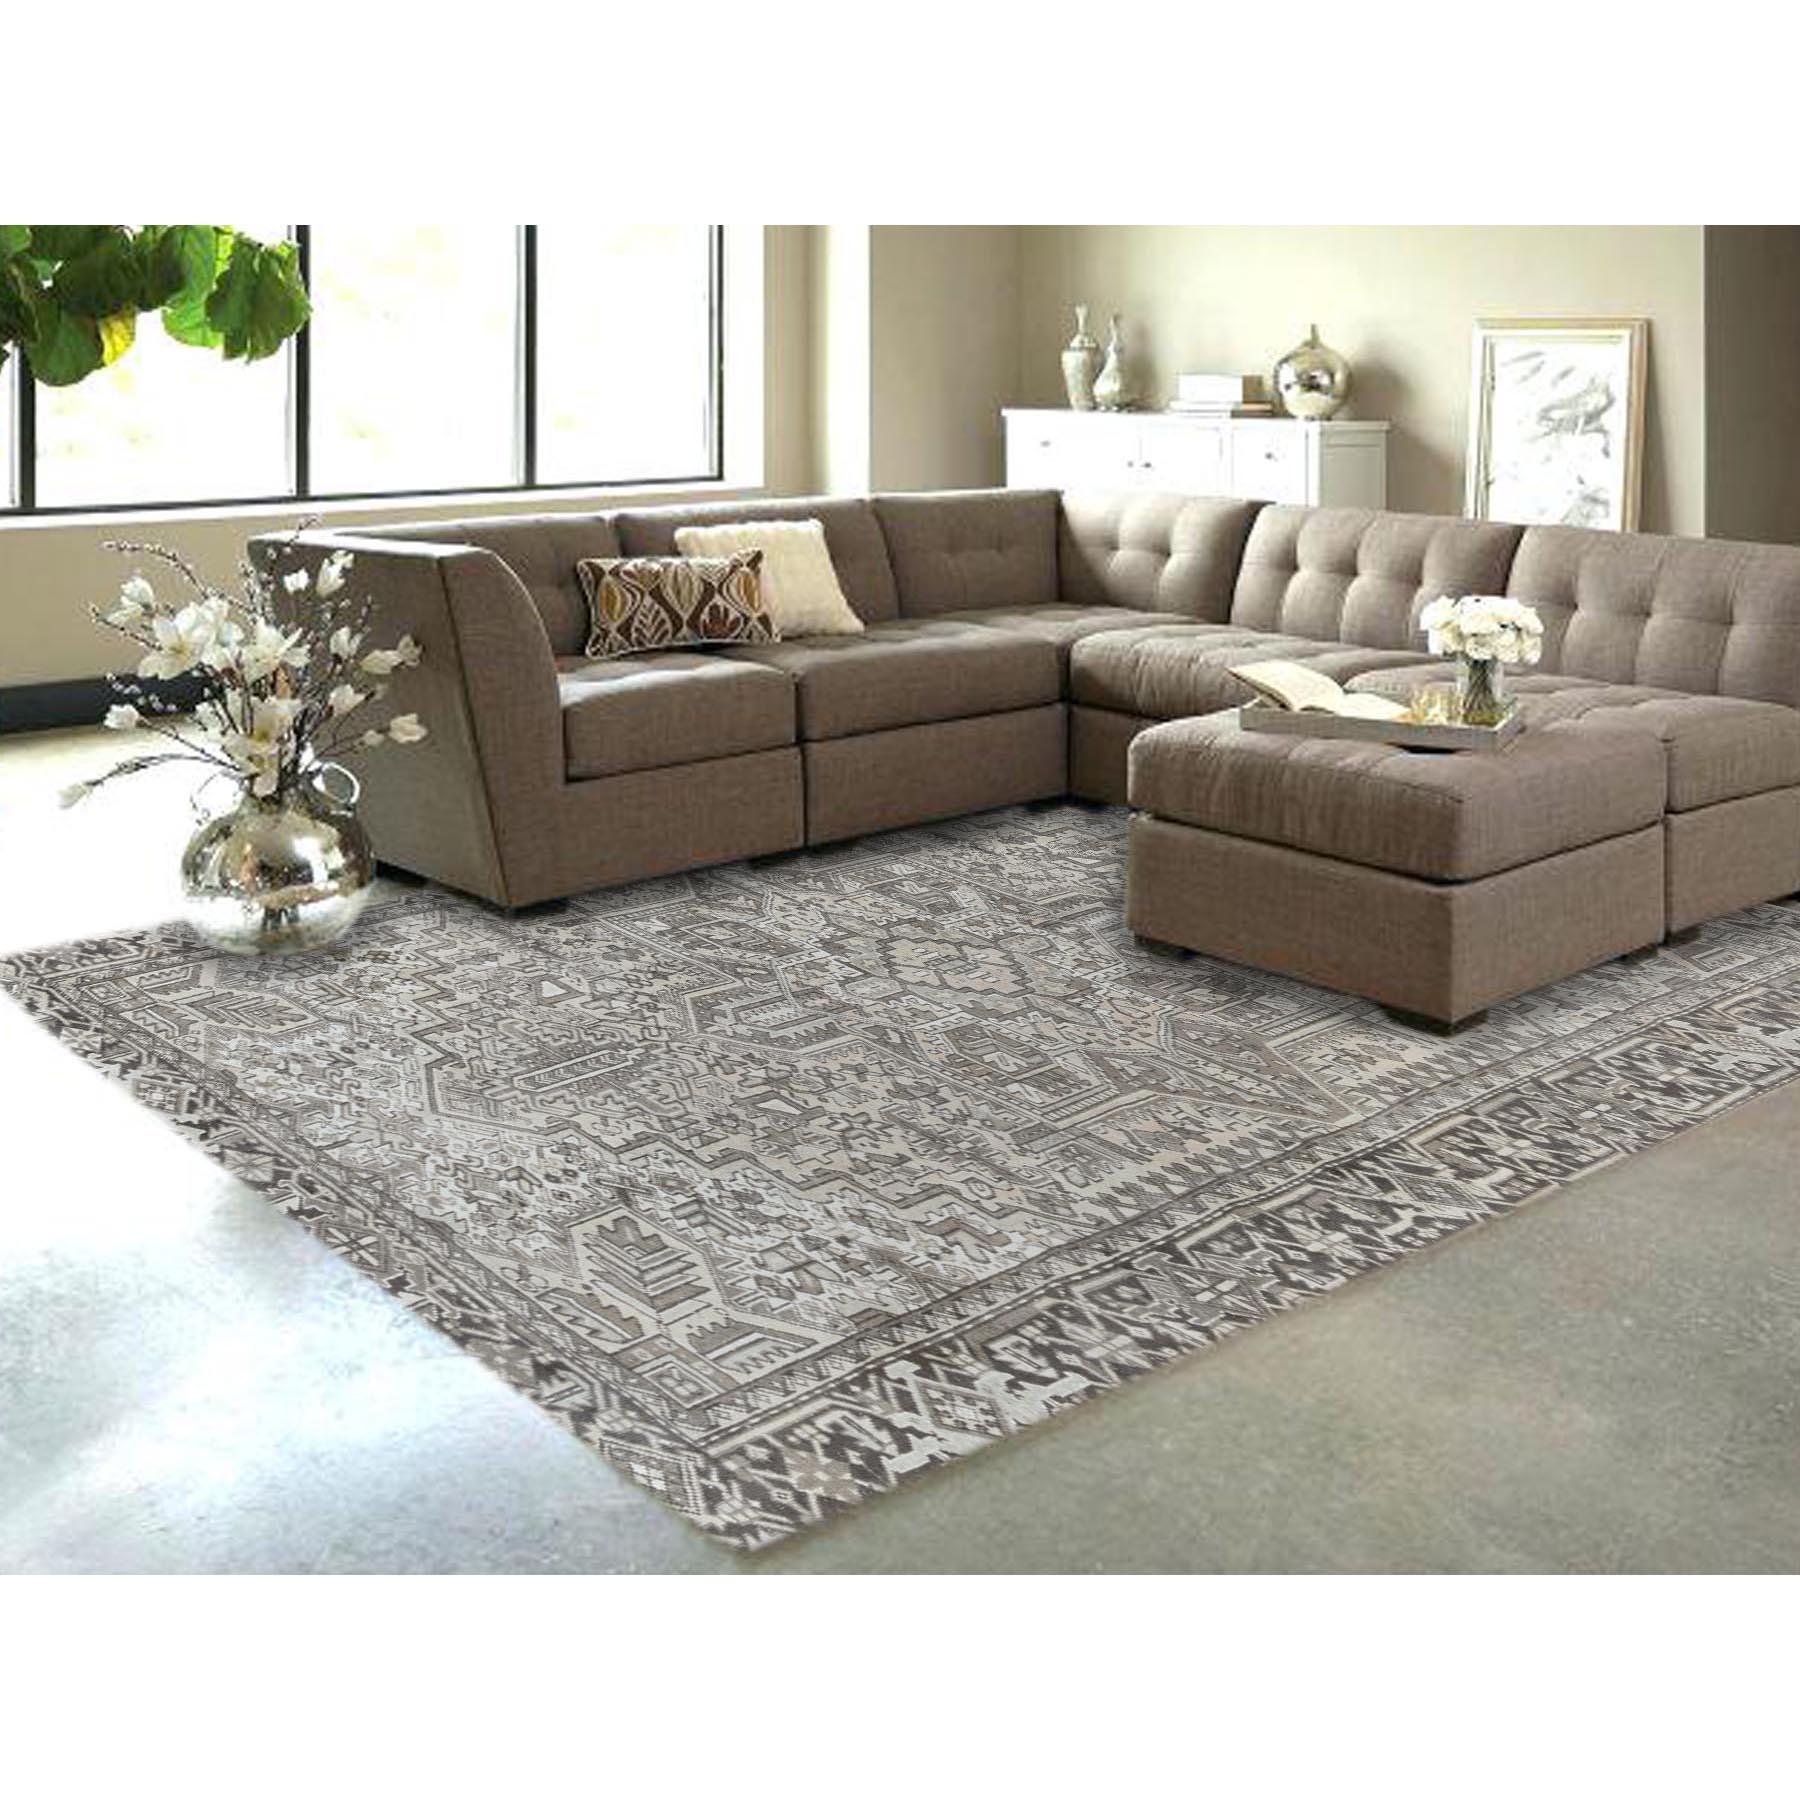 This fabulous hand knotted carpet has been created and designed for extra strength and durability. This rug has been handcrafted for weeks in the traditional method that is used to make Rugs. This is truly a one of a kind piece. 

Exact rug size in